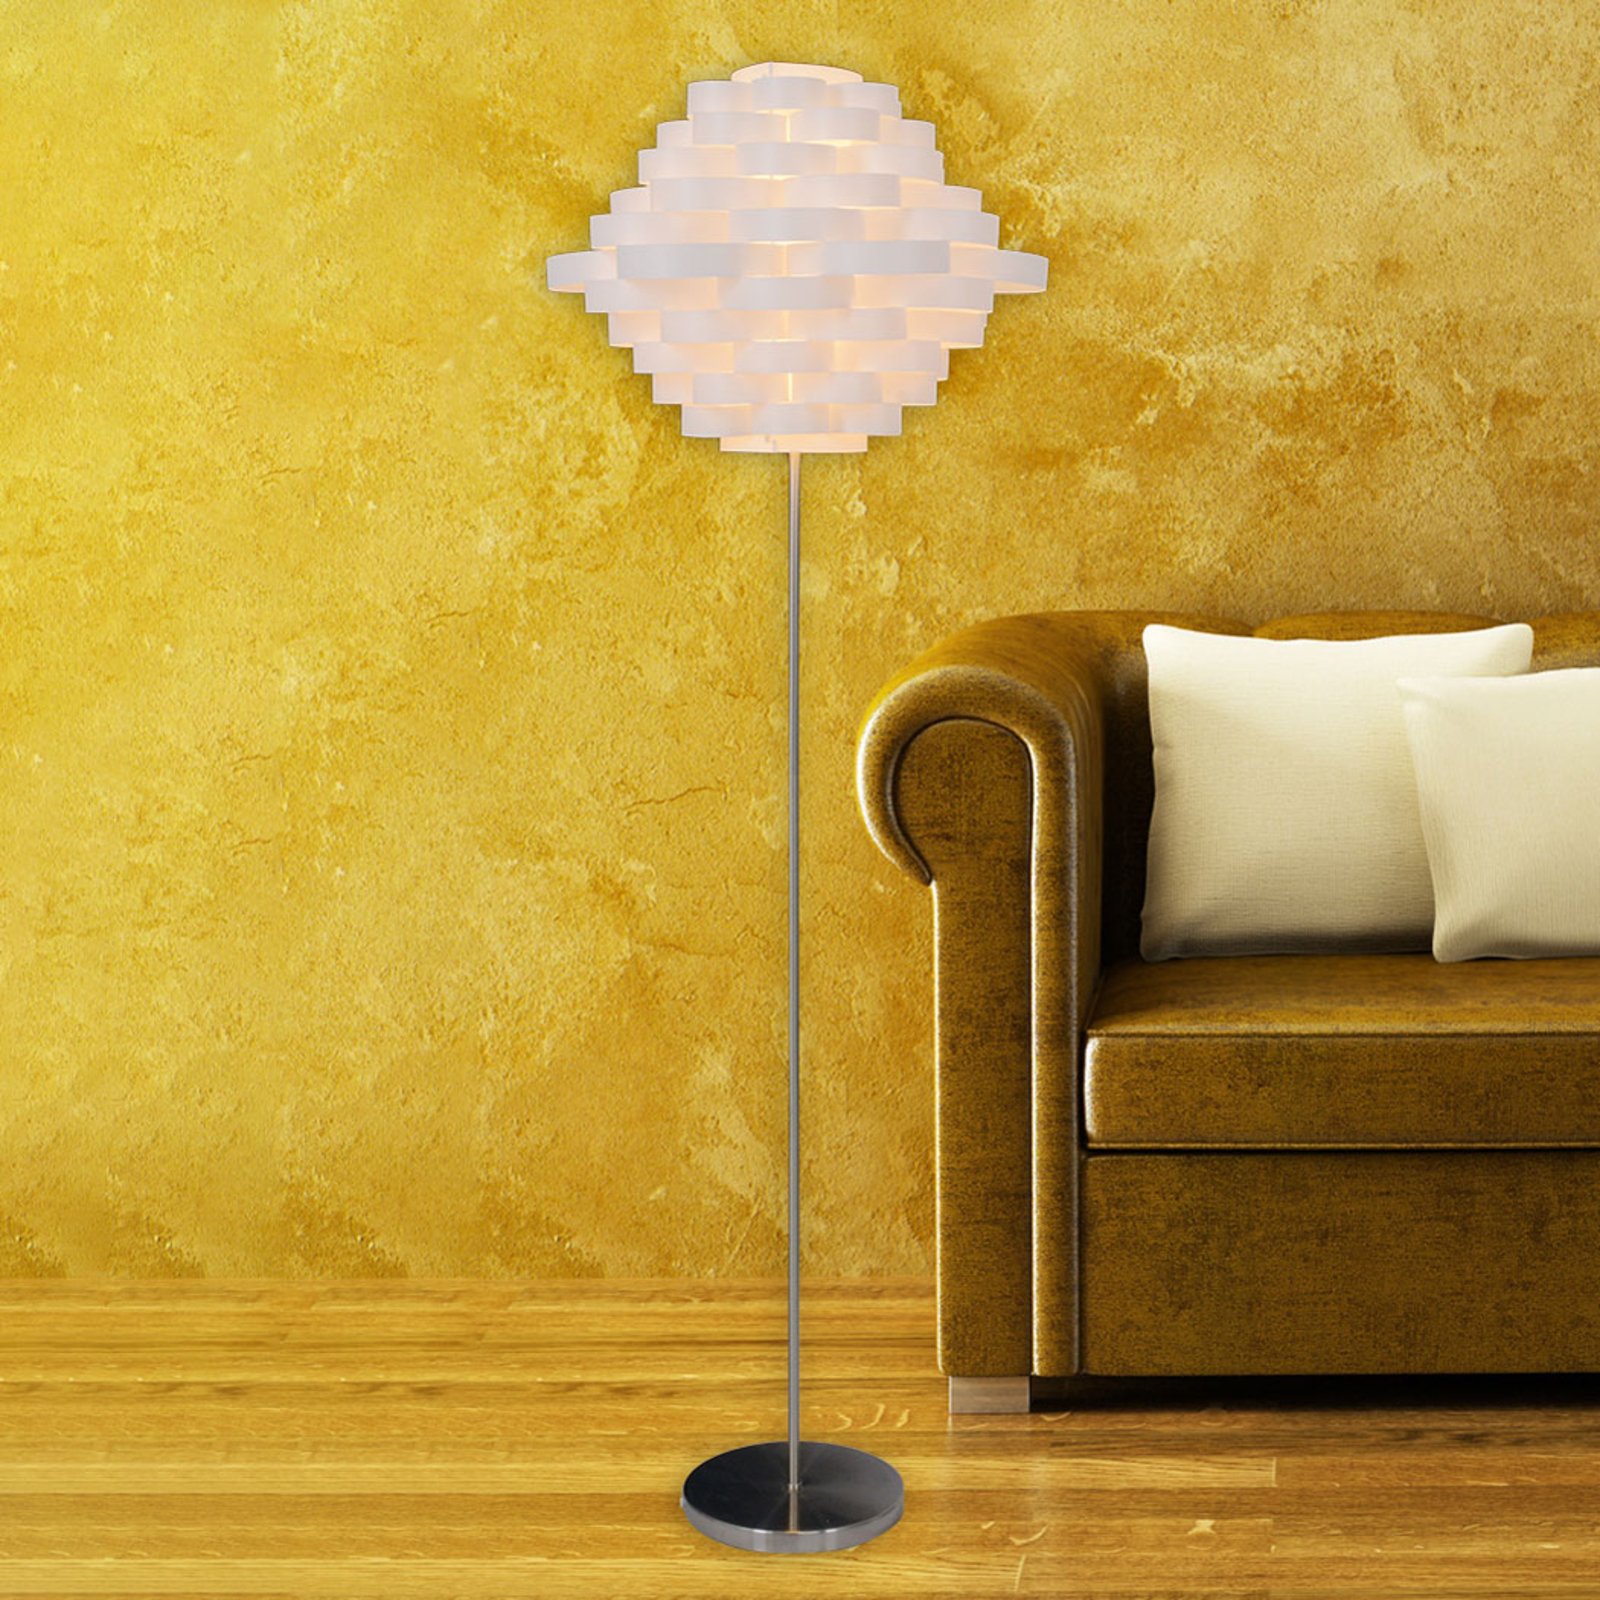 White floor lamp with lampshade of circular discs